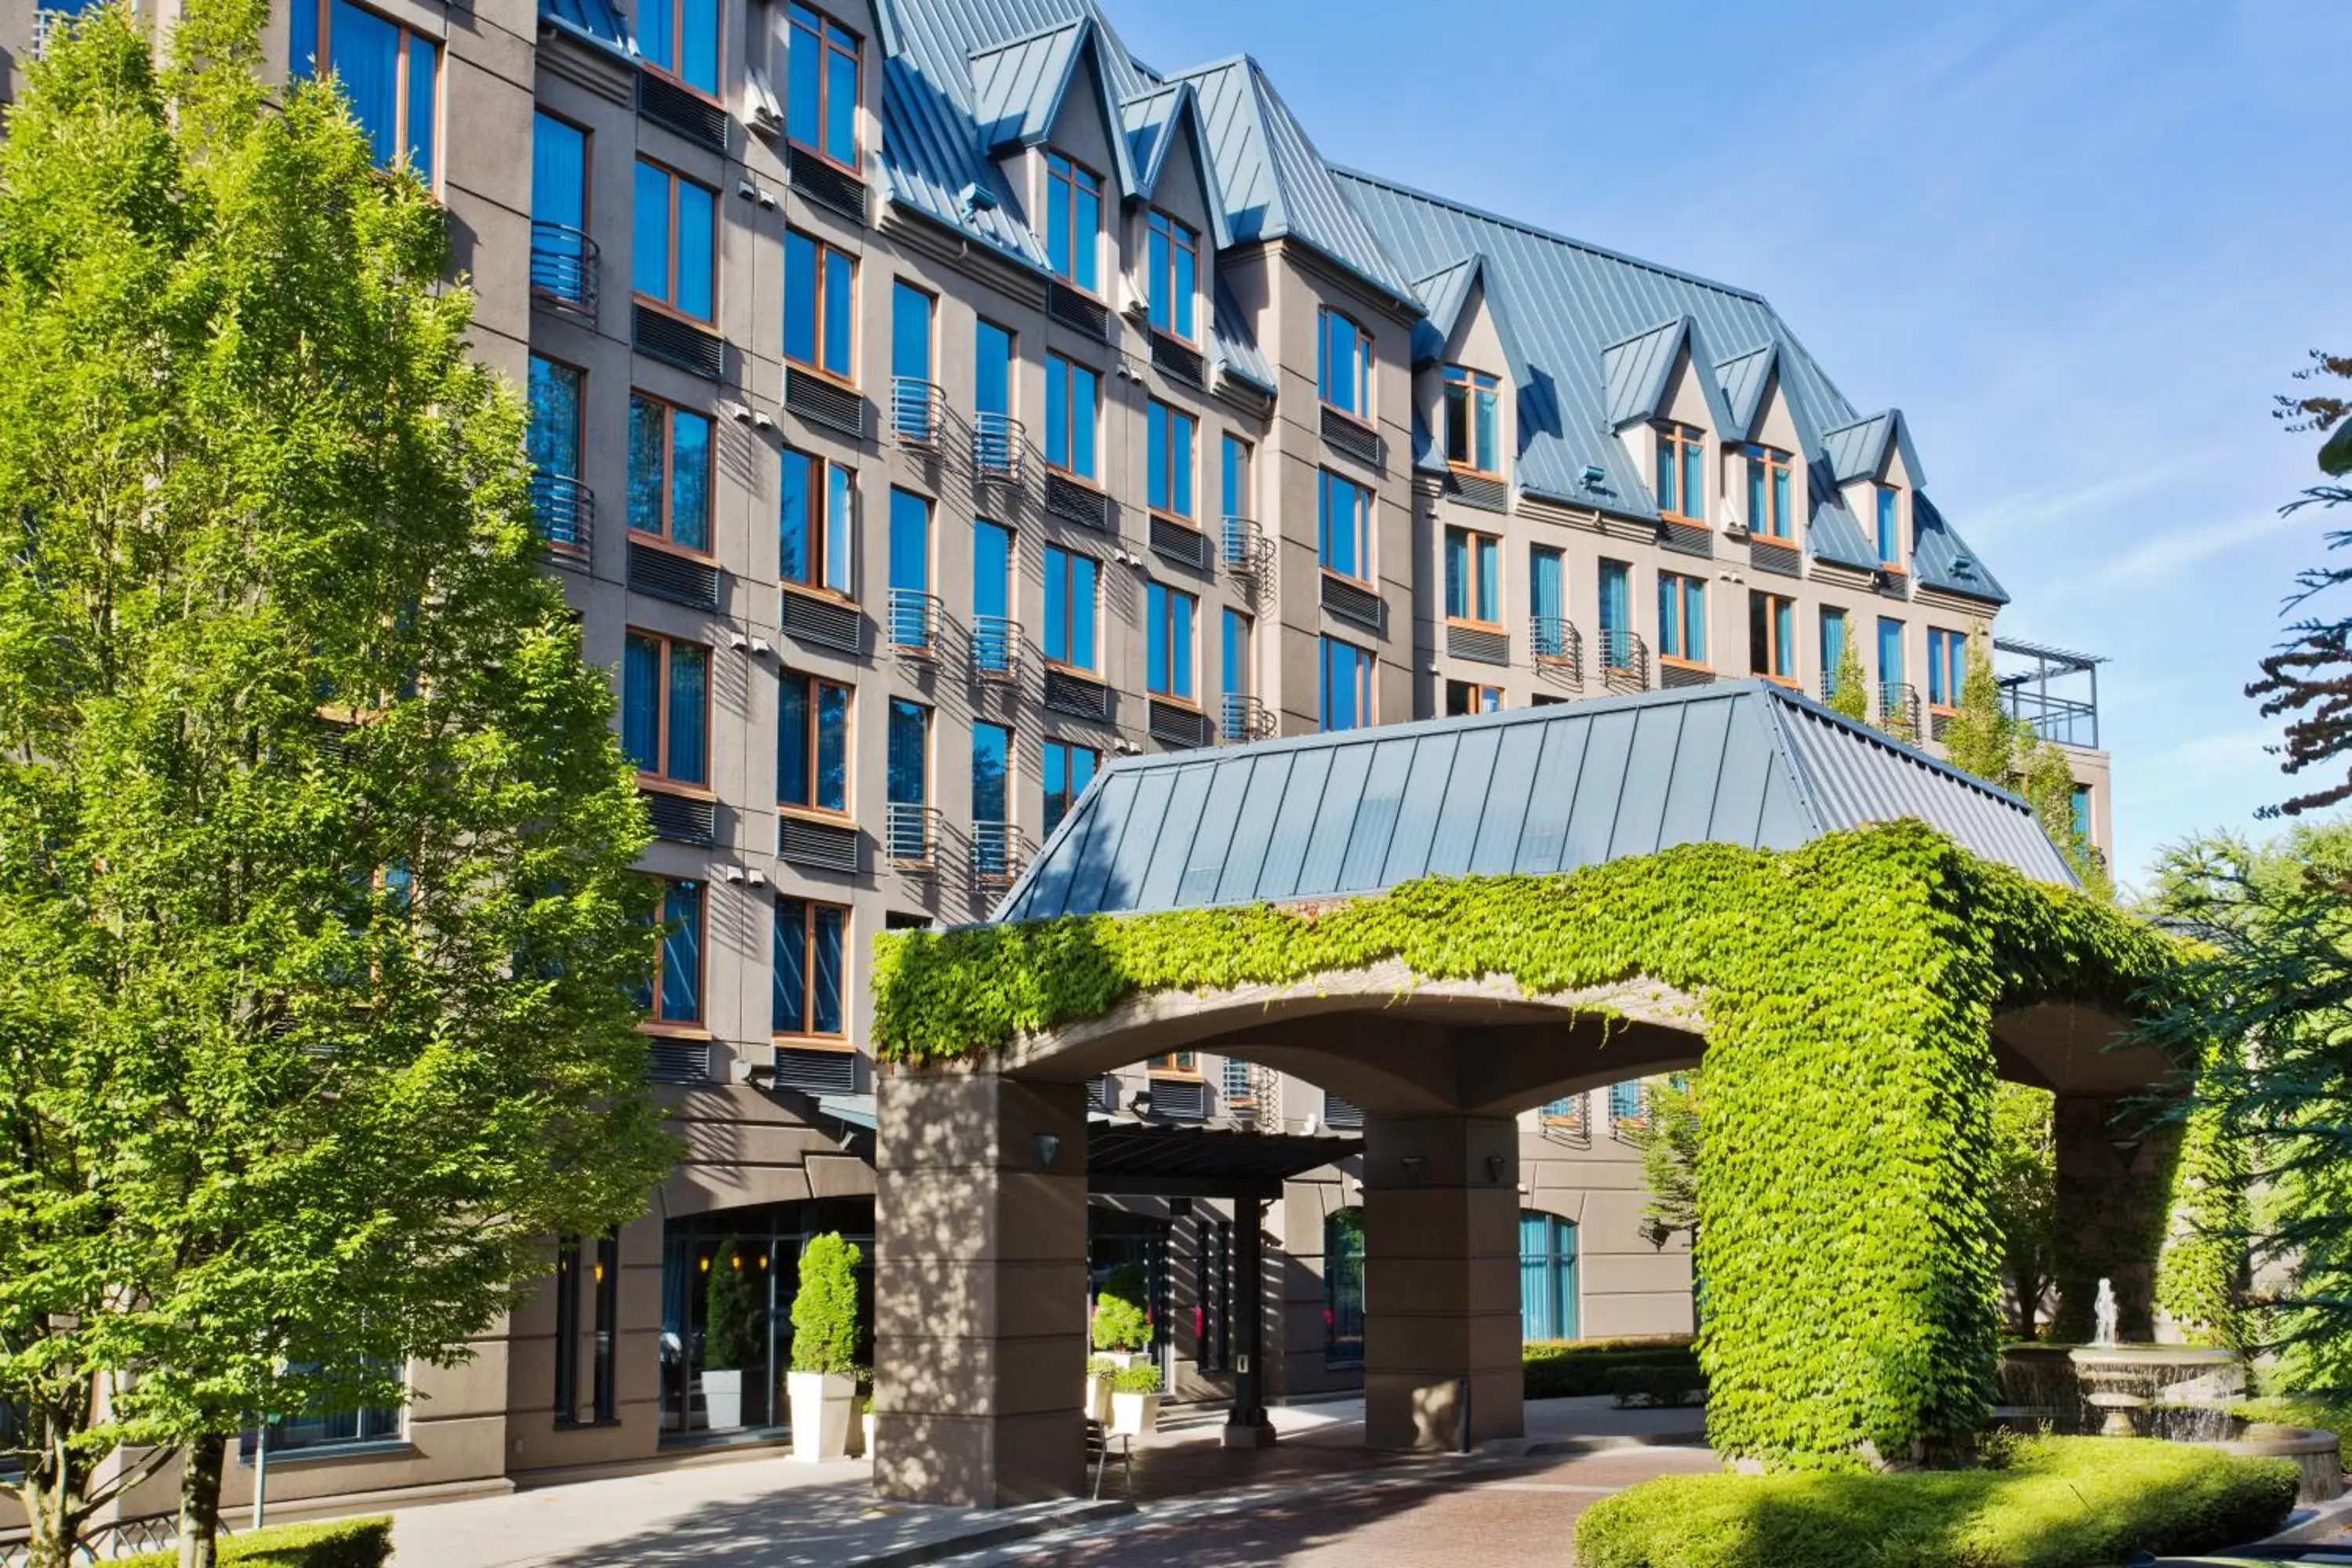 Property Building in Holiday Inn & Suites North Vancouver, an IHG Hotel